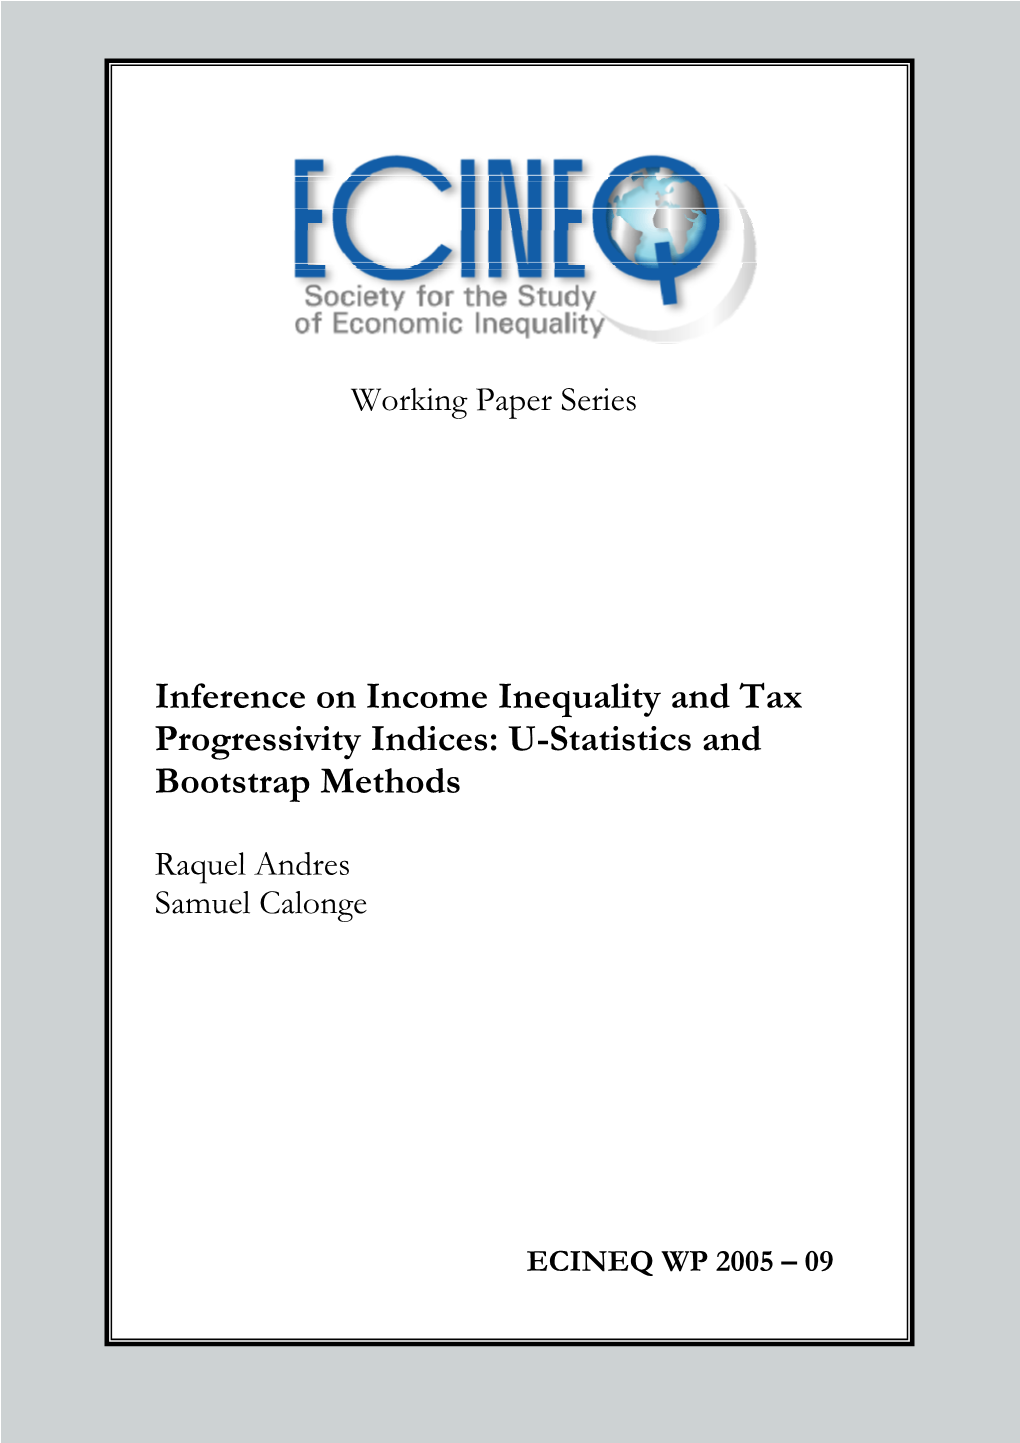 Inference on Income Inequality and Tax Progressivity Indices: U-Statistics and Bootstrap Methods